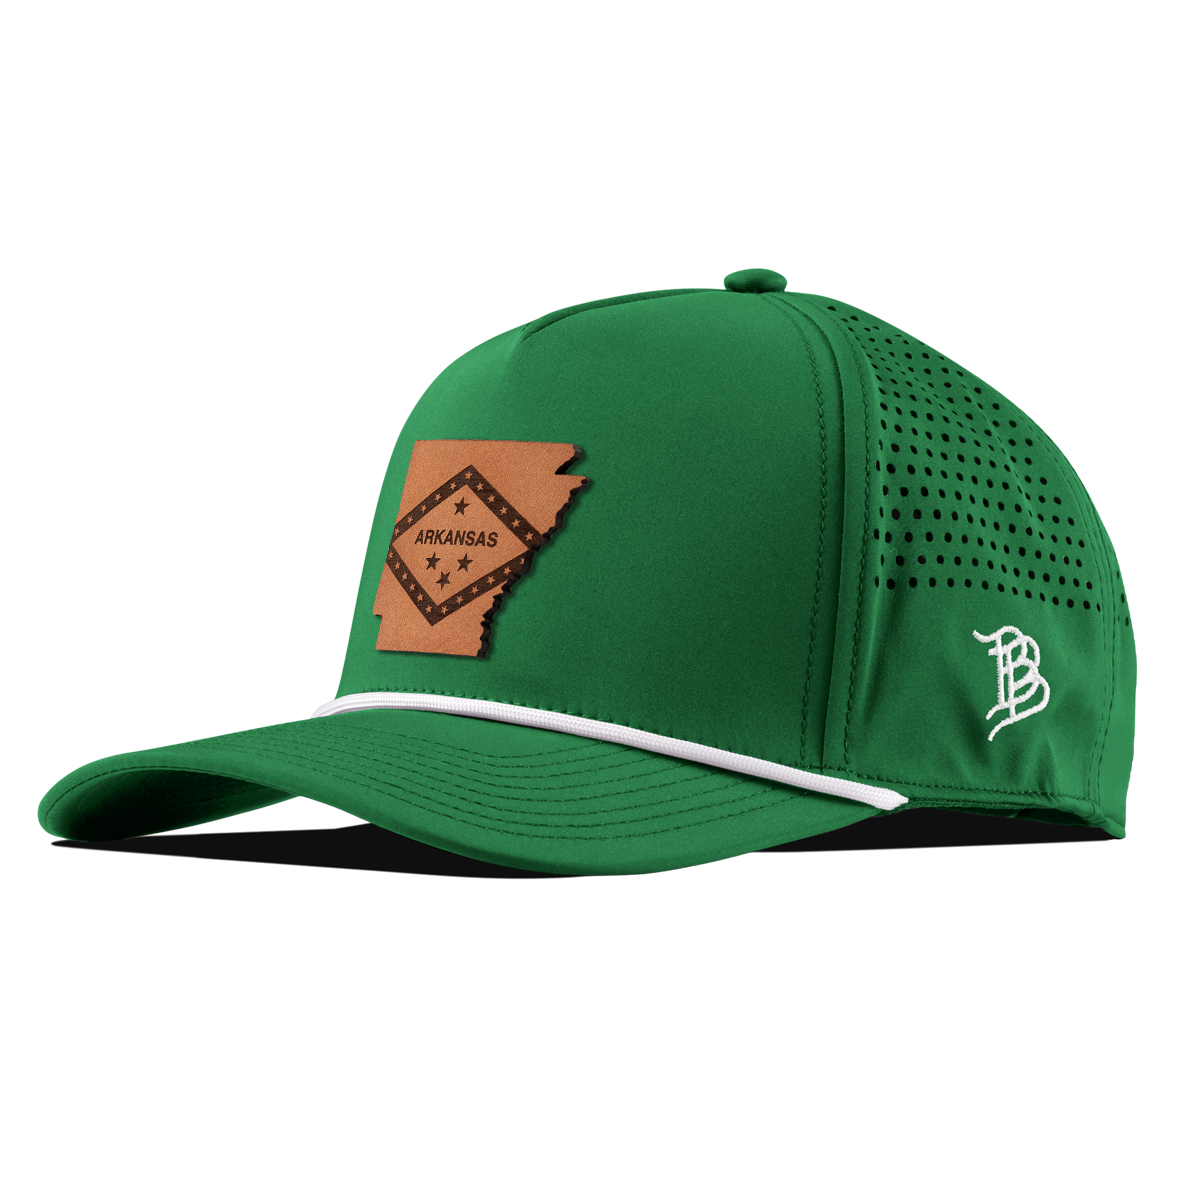 Arkansas 25 Curved 5 Panel Rope Kelly Green